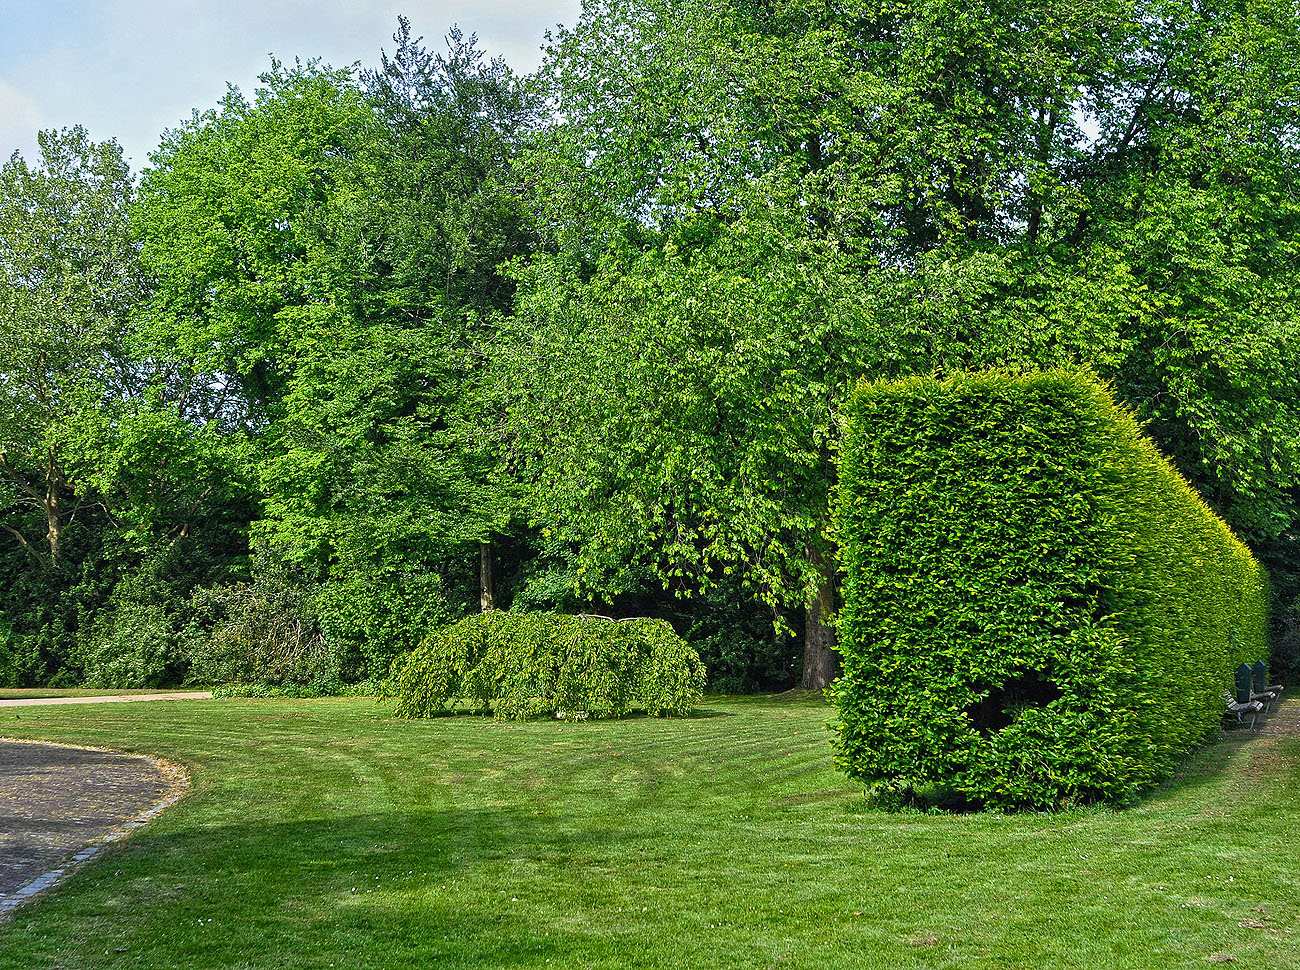 Professional hedge trimming and hedge cutting from Allwinds Grounds Ltd, landscape gardeners throughout buckinghamshire, hertfordshire and bedfordshire